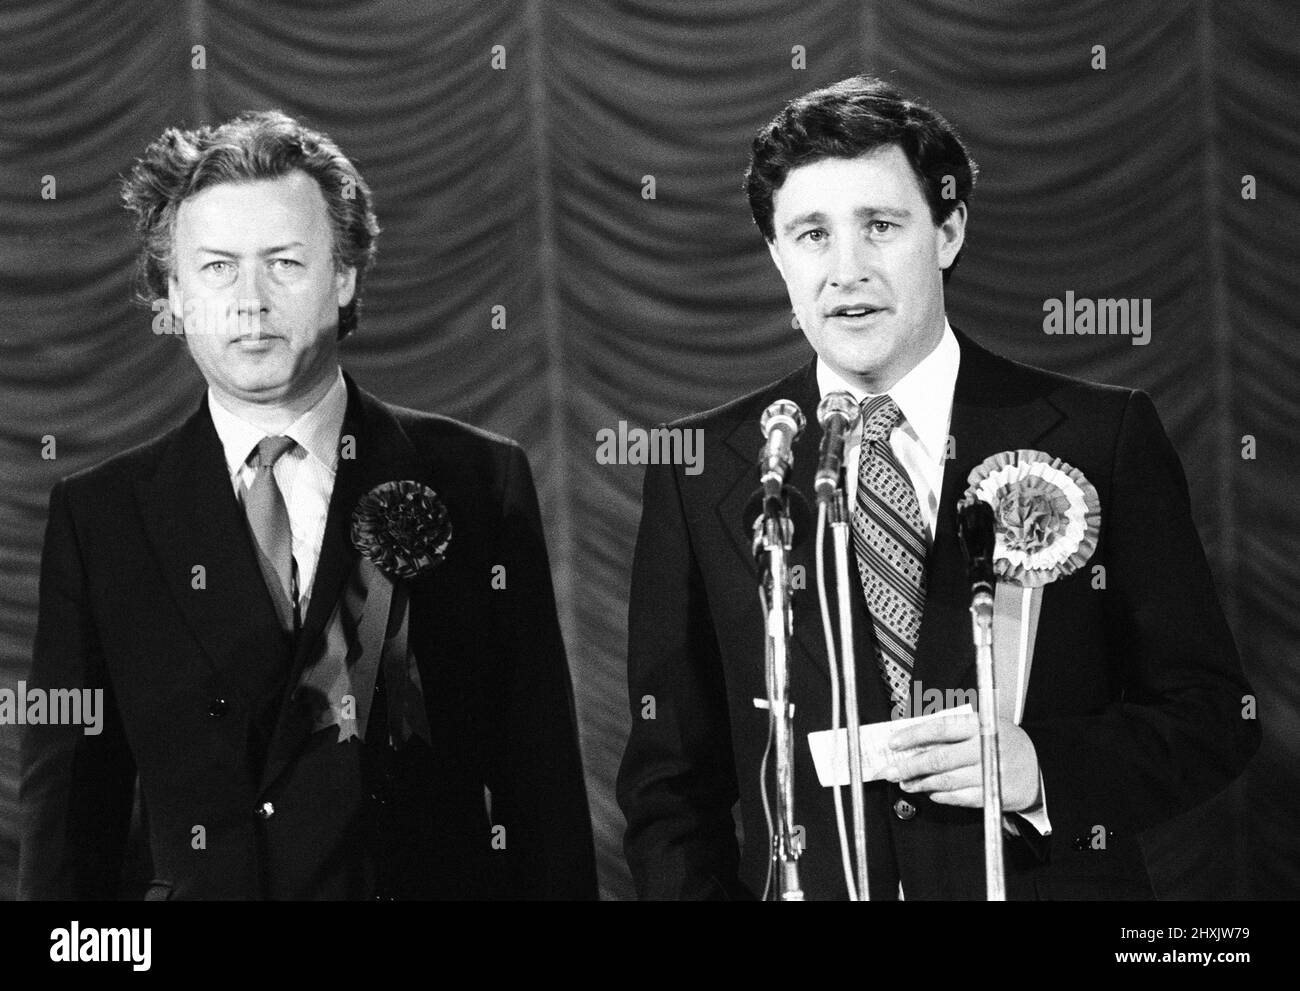 Coventry North West By-election, due to the death of the incumbent Maurice Edelman, Coventry, Thursday 4th March 1976. Our Picture Shows ... Geoffrey Robinson winning candidate for Labour, also pictured, Jonathan Guinness of the Conservative Party. Stock Photo